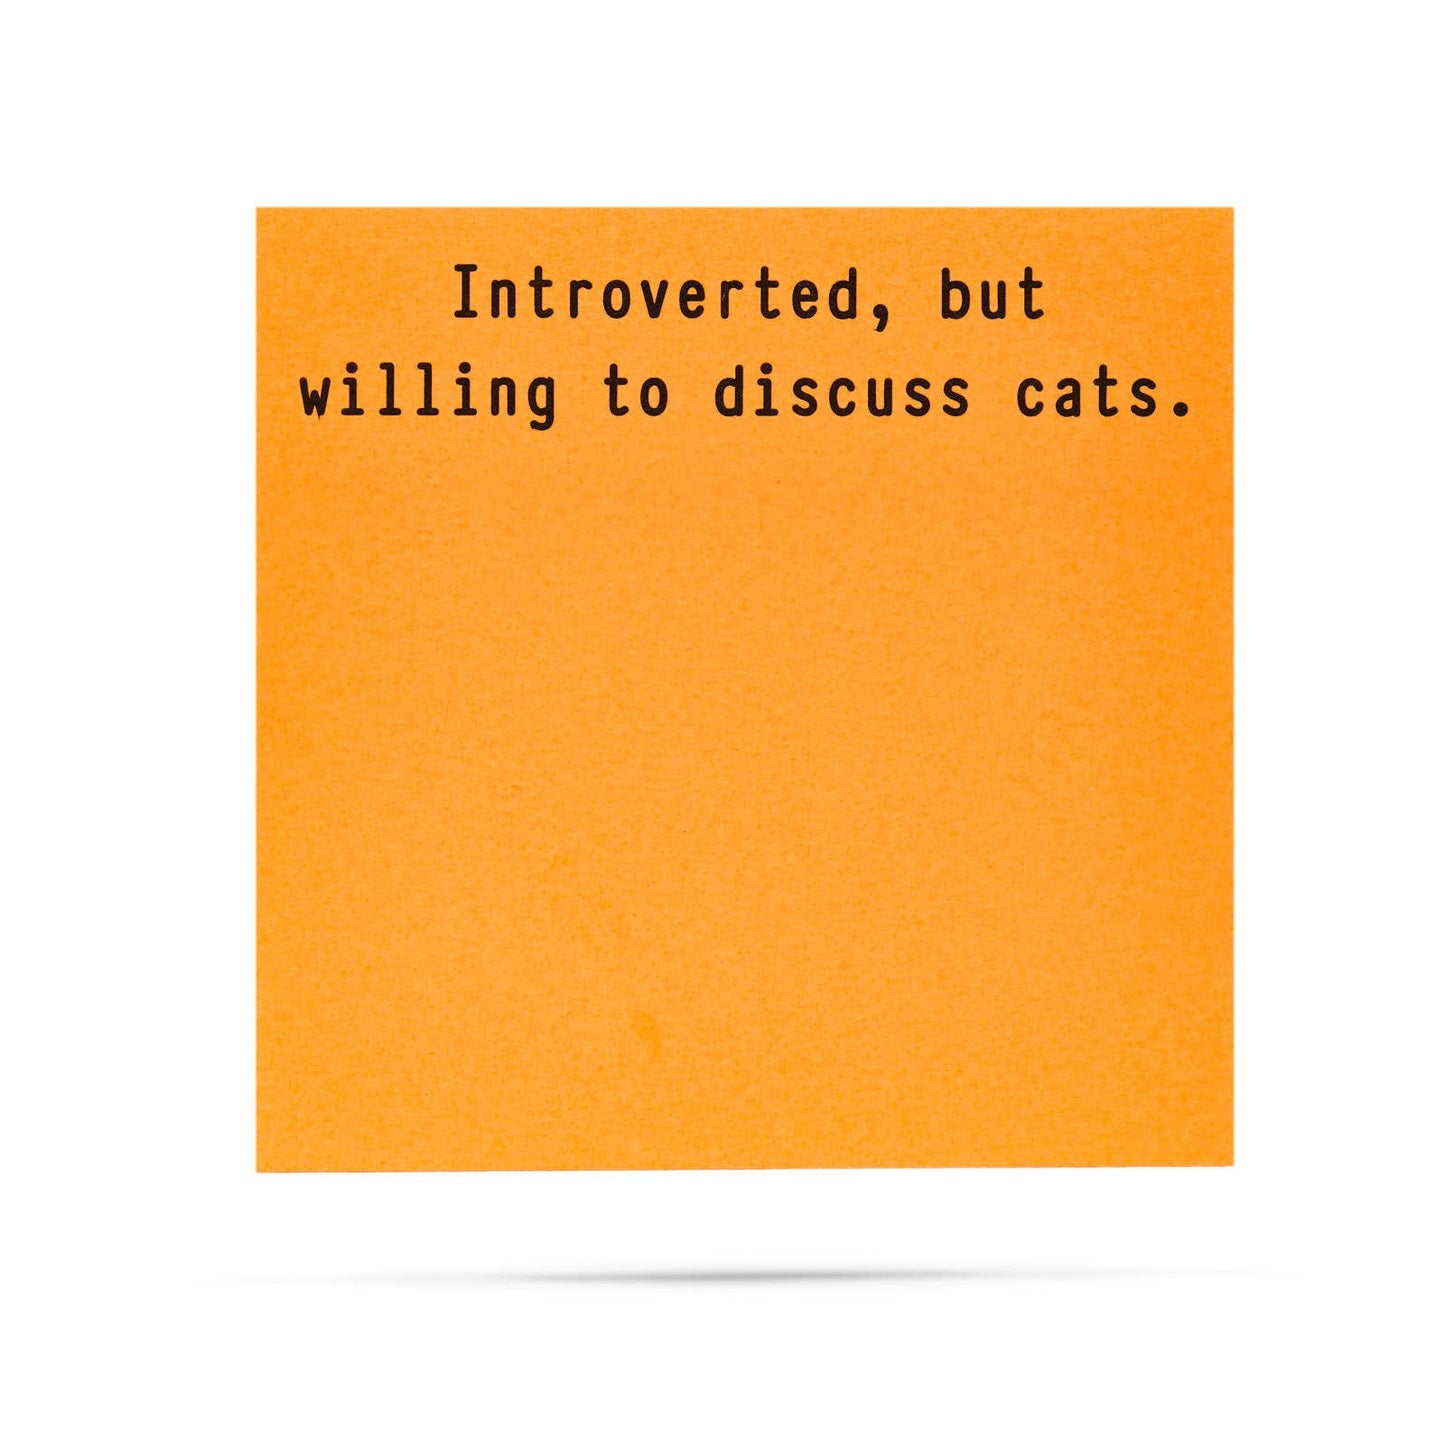 Introverted, but willing to discuss cats - sticky notes